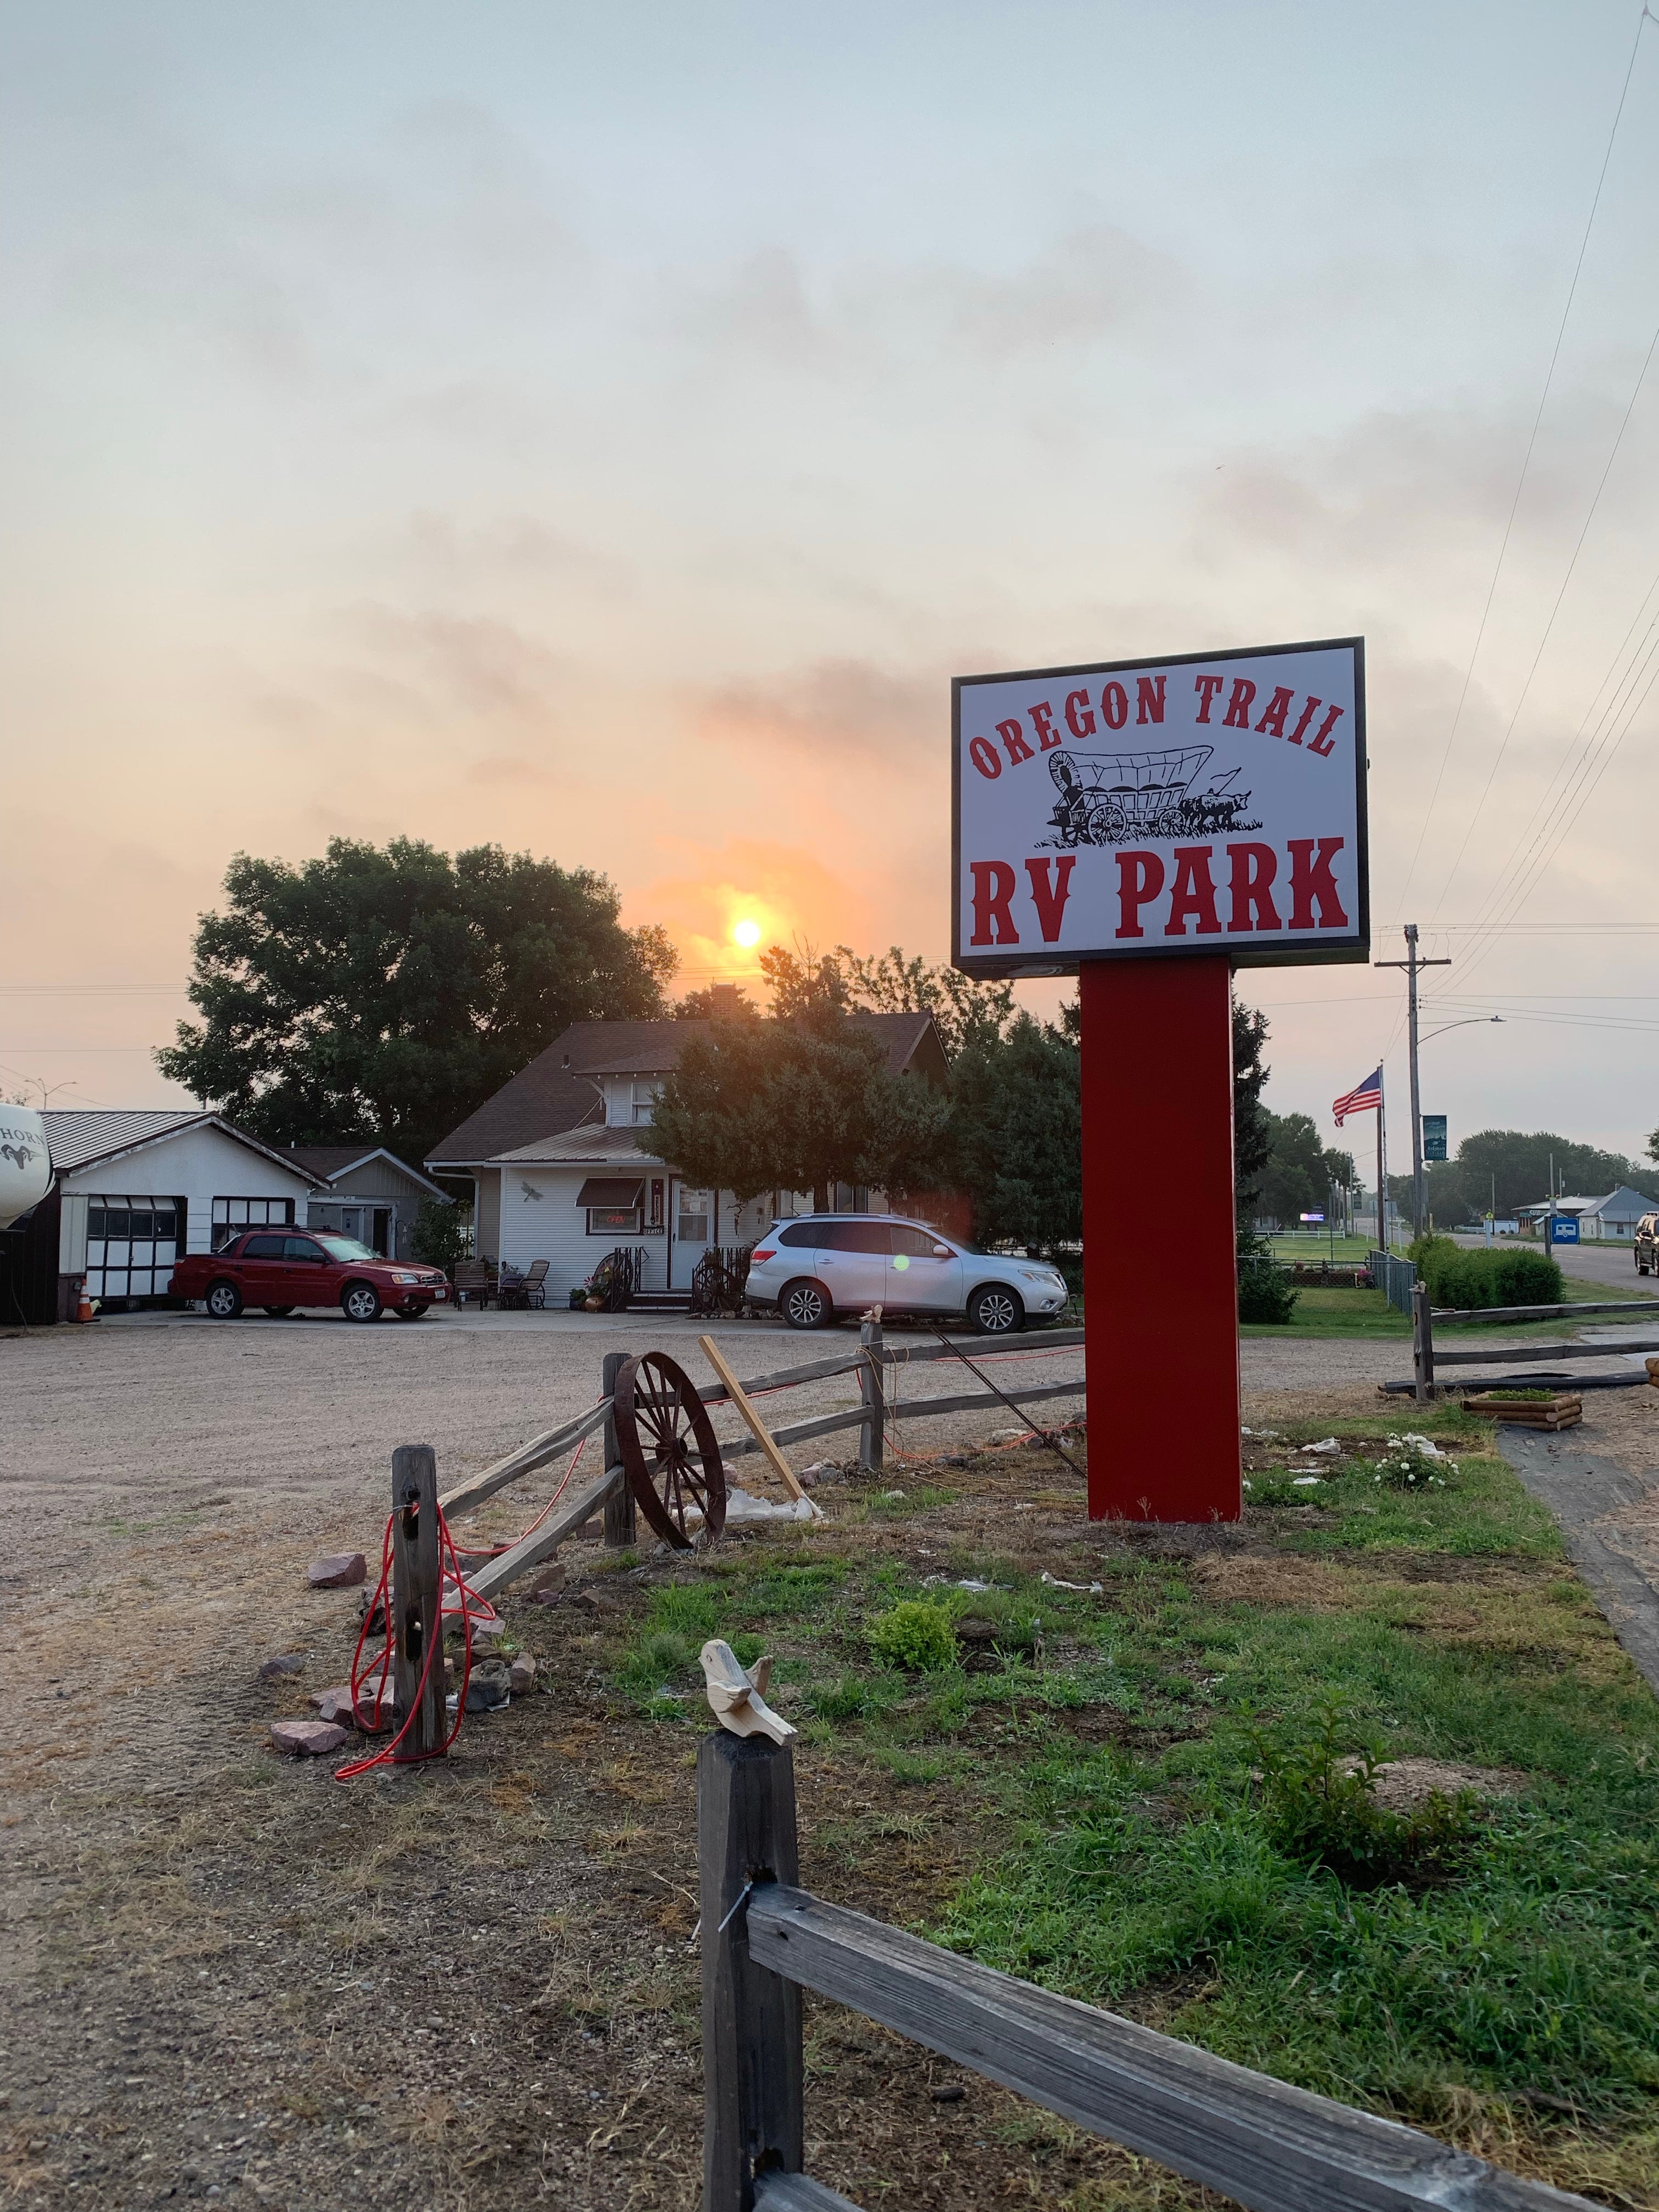 Camper submitted image from Oregon Trail RV Park (formerly The Wheel inn Rv Park) - 1